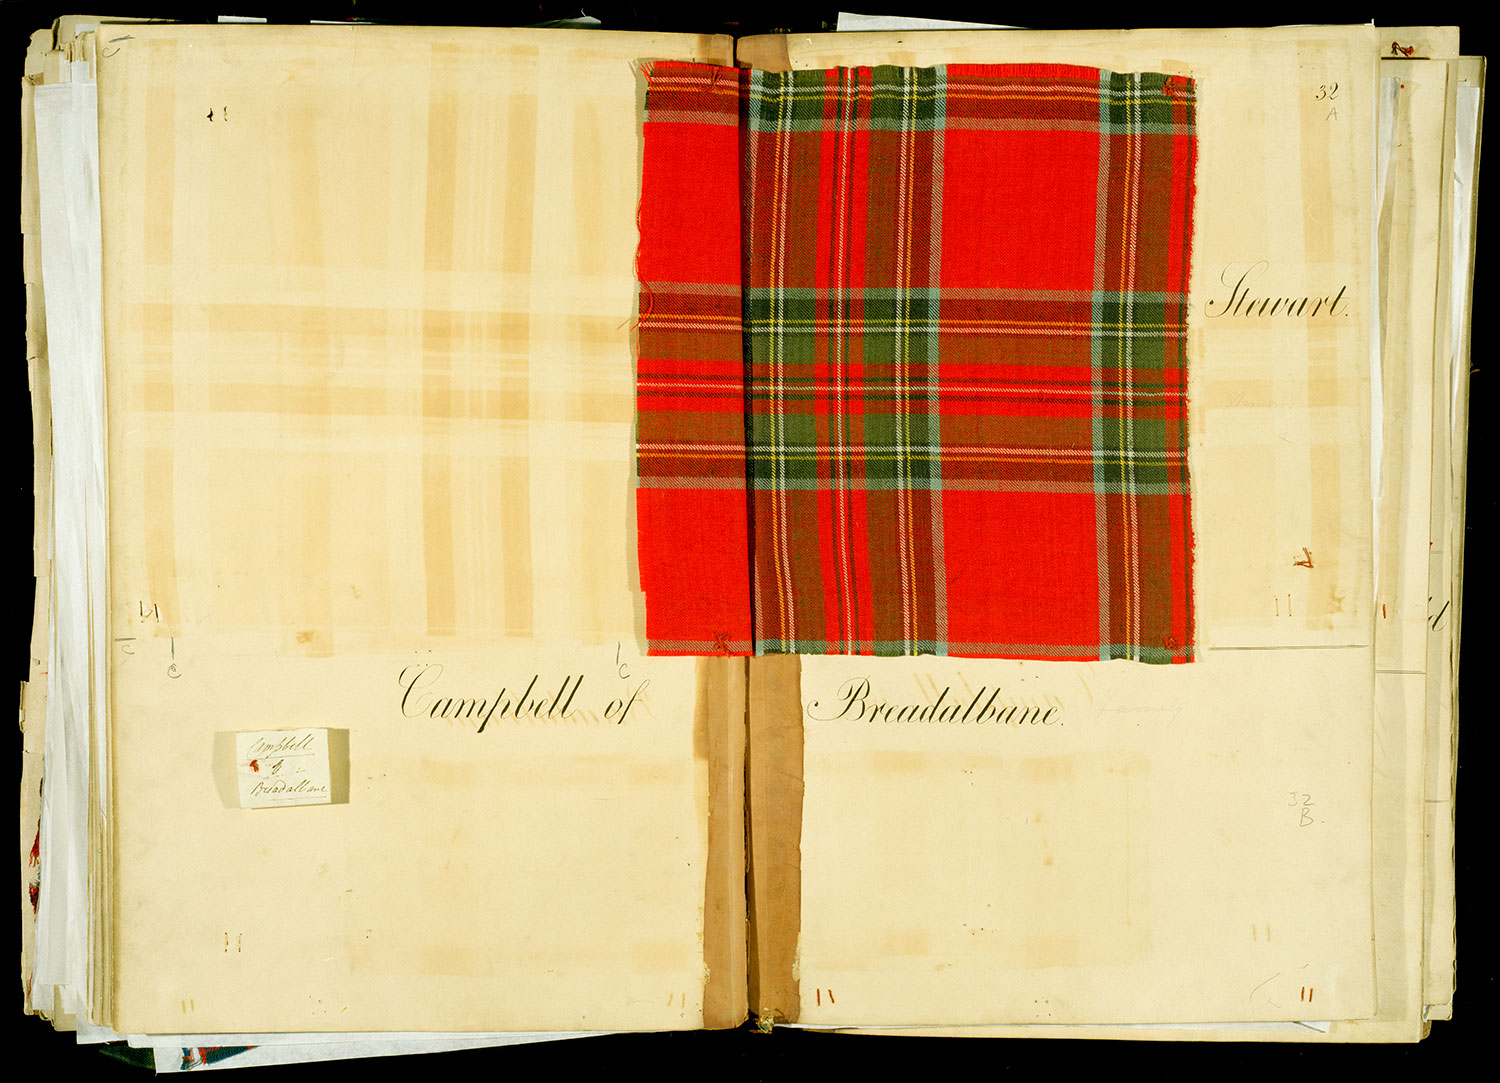 Ledgers of tartan samples formed by the Highland Society of London, c. 1820.